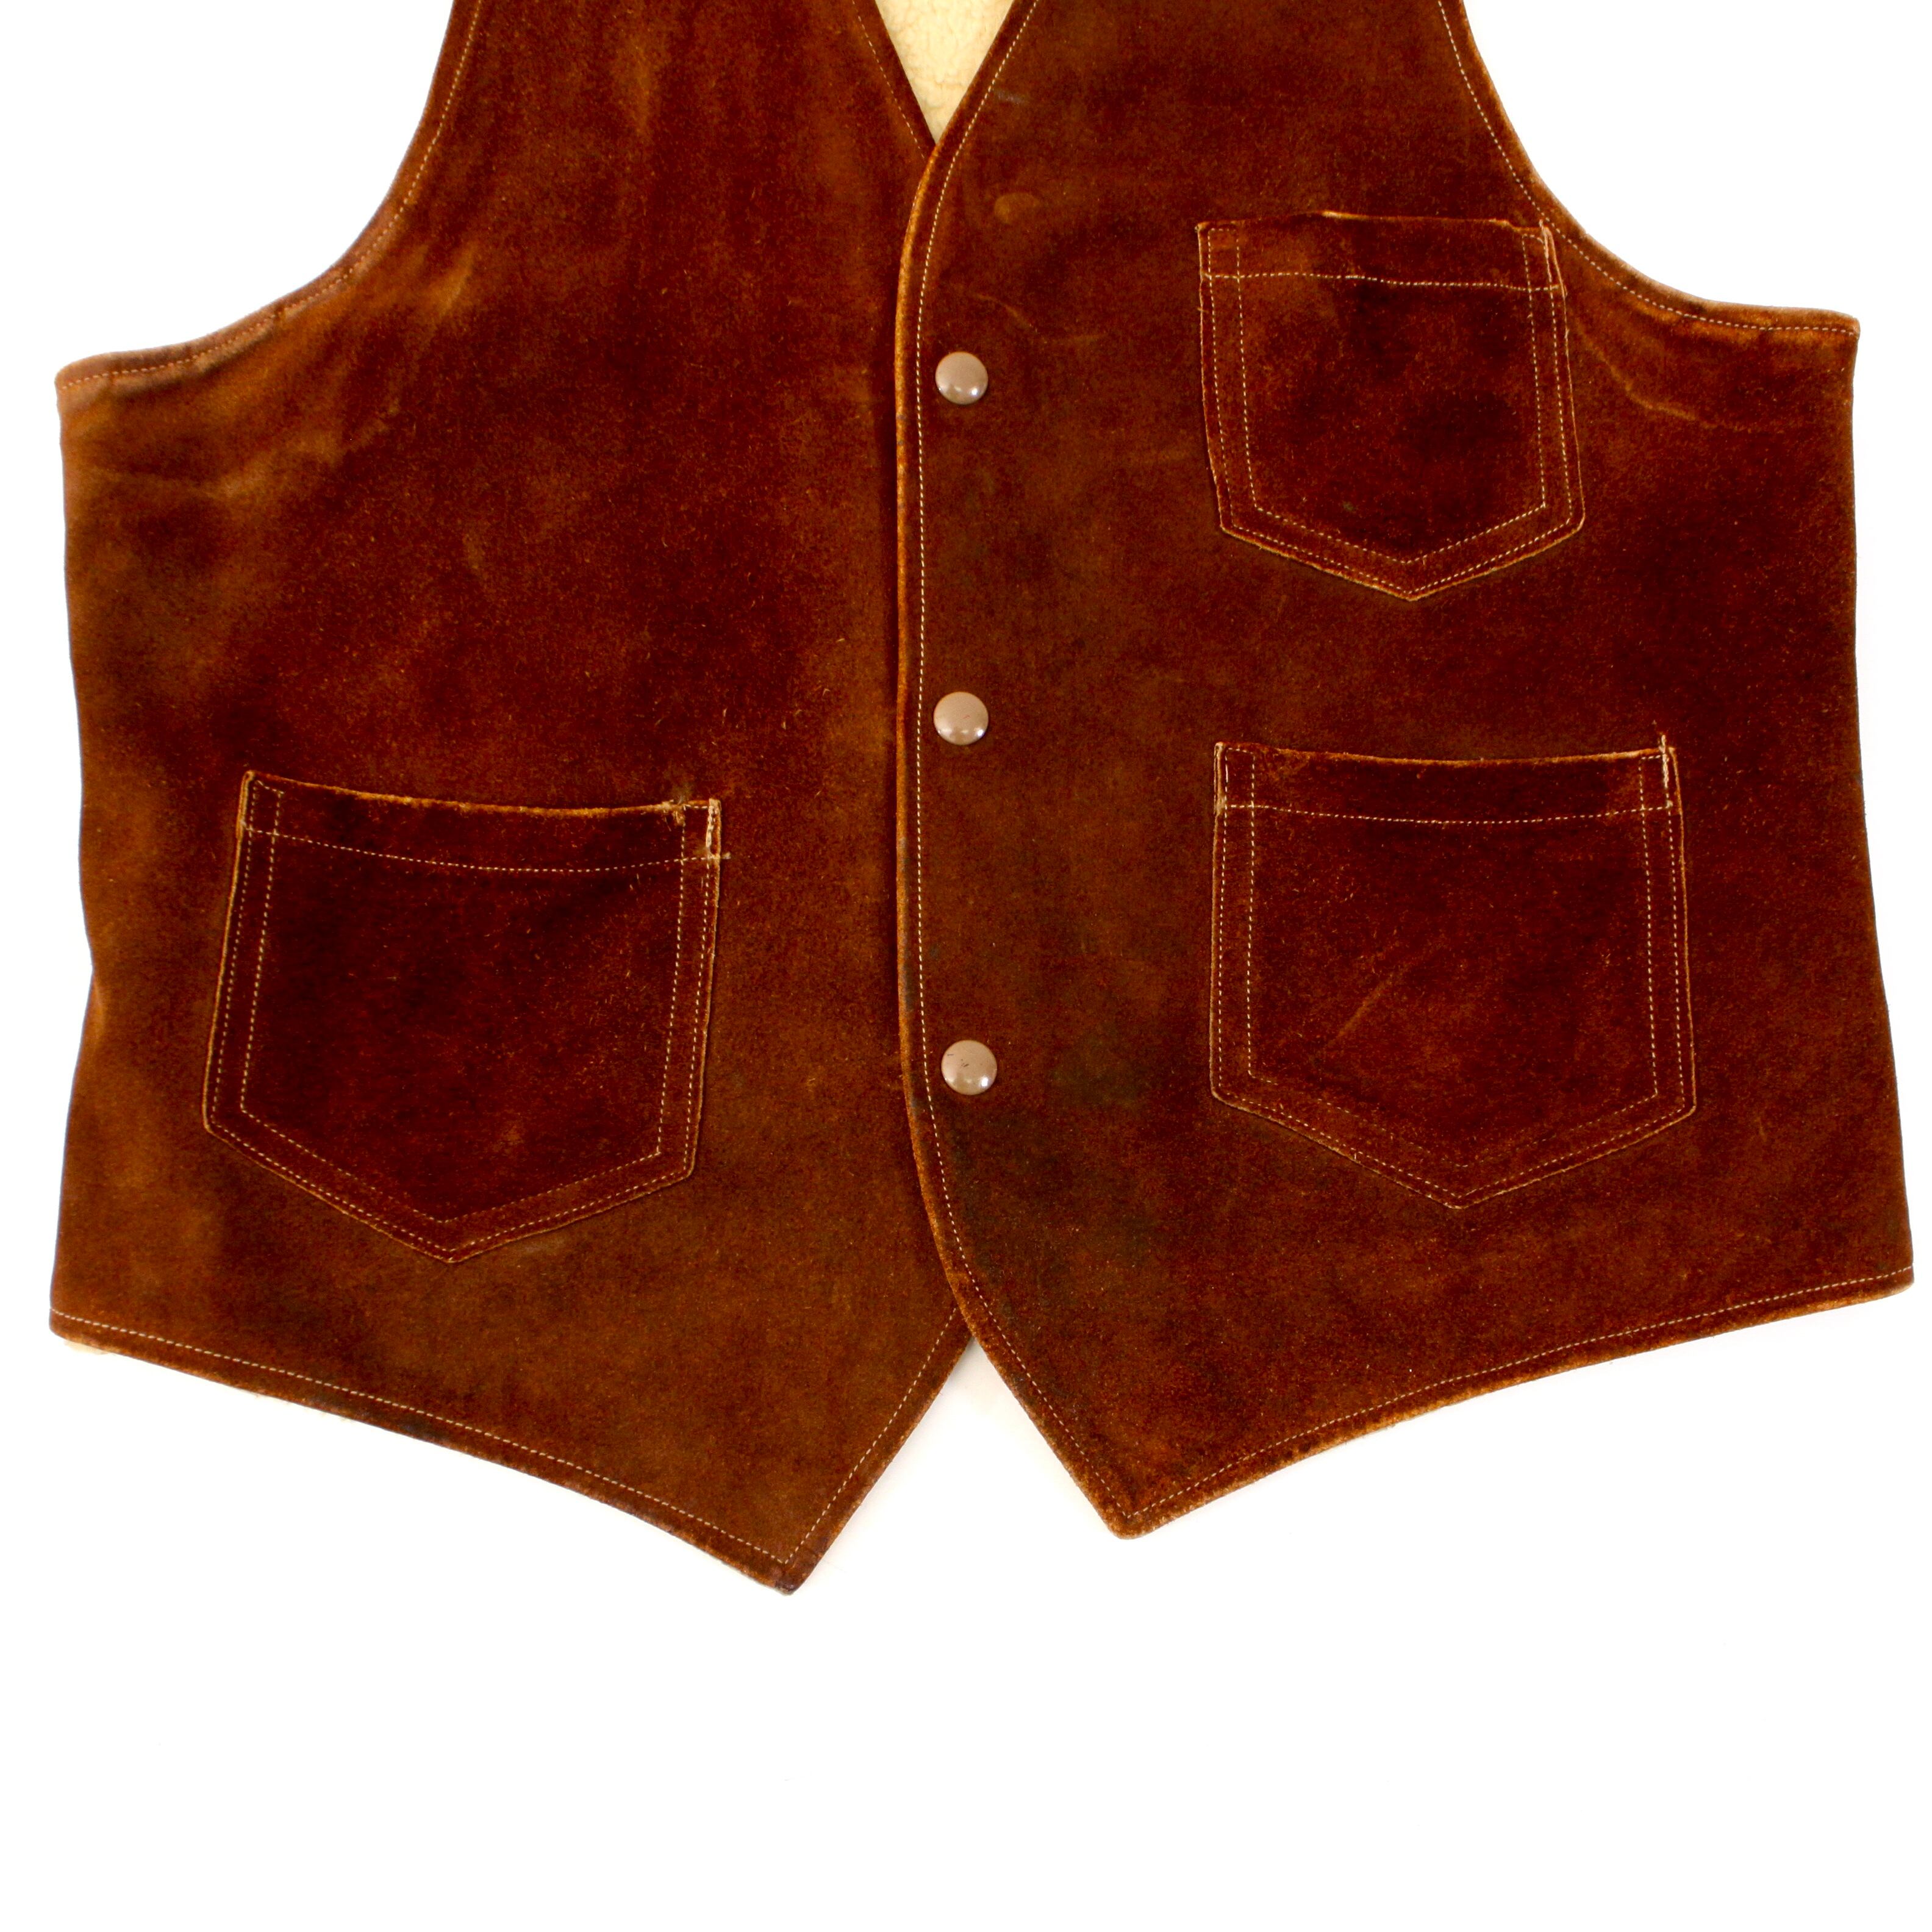 1031. 1950's Suede leather vest 50s 50年代 スウェード レザーベスト